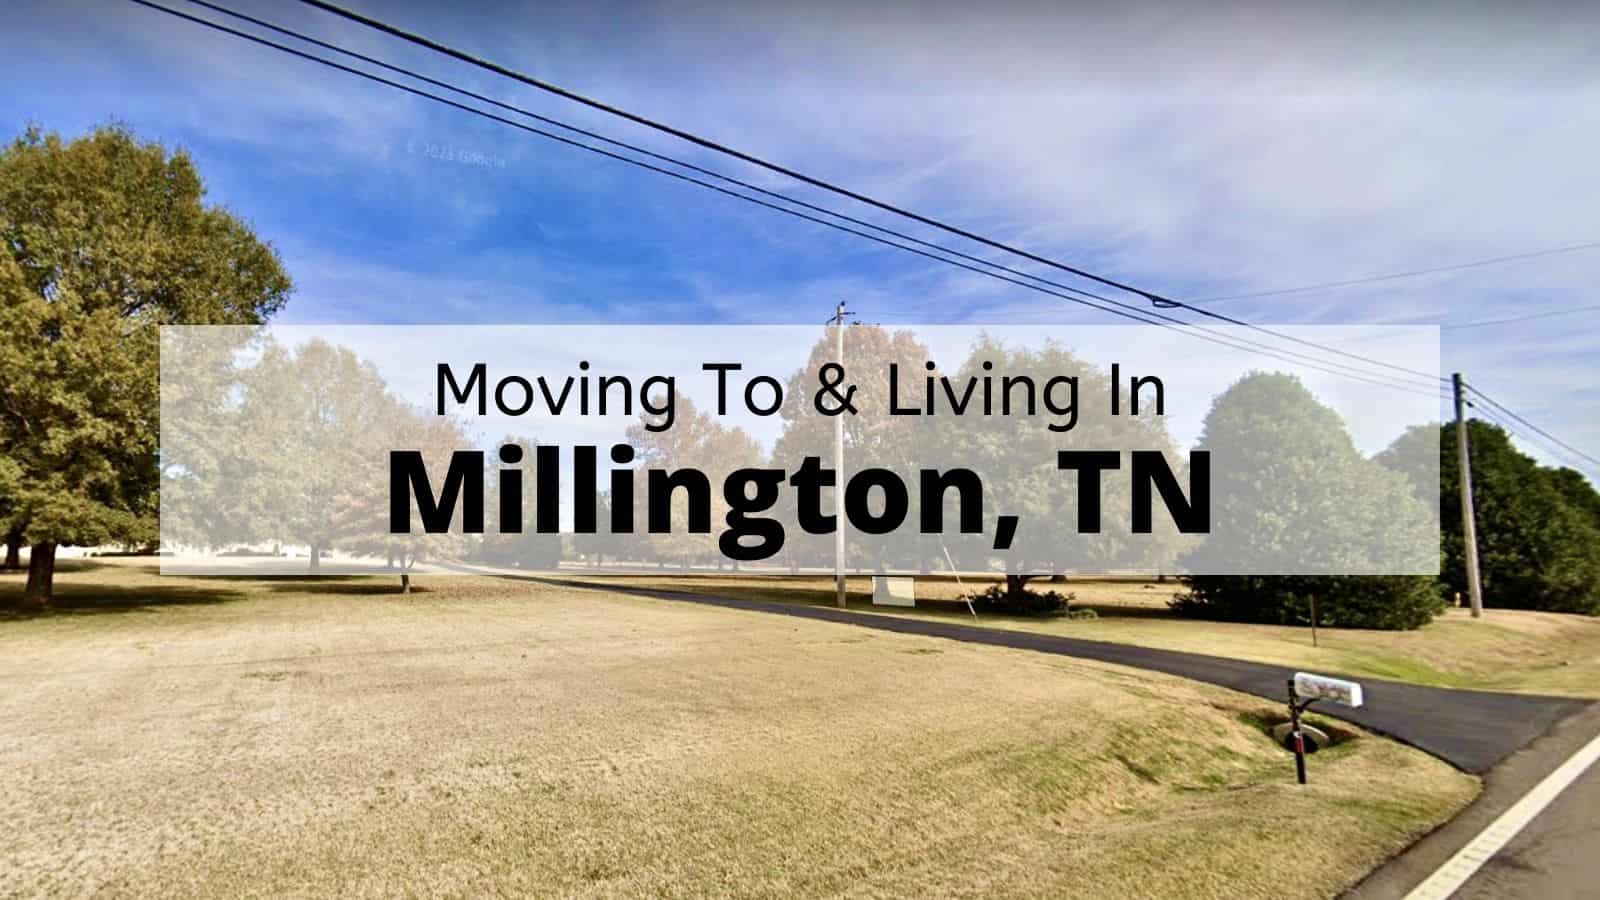 Moving to & Living in Millington, TN